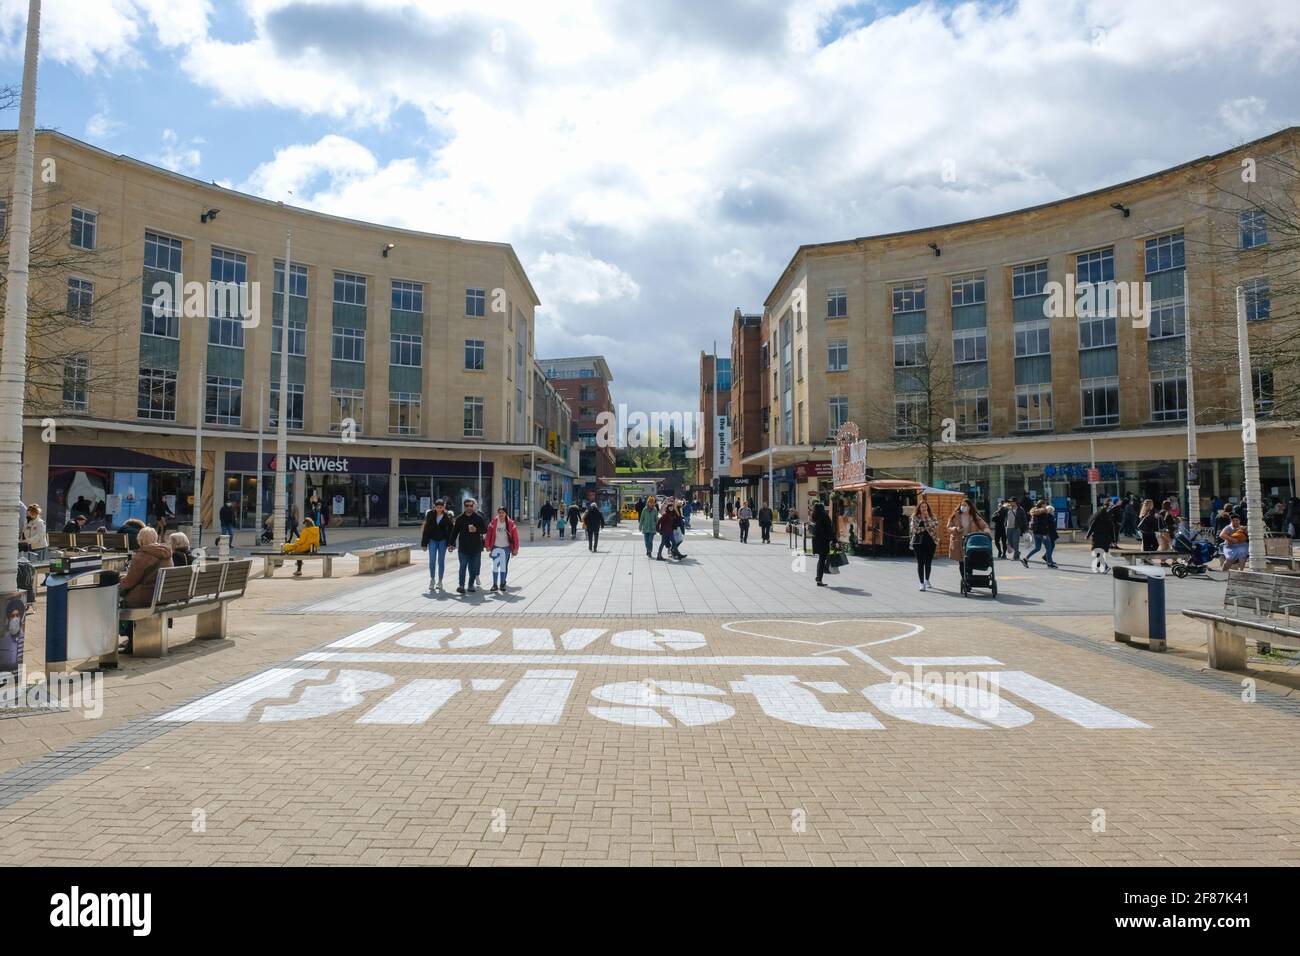 https://c8.alamy.com/comp/2F87K41/broadmead-bristol-uk-12th-apr-2021-designers-from-upfest-have-decorated-the-pavement-non-essential-shops-are-allowed-to-open-in-england-people-are-queuing-outside-their-favourite-retail-outlets-in-broadmead-shopping-quarter-bristol-credit-jmf-newsalamy-live-news-2F87K41.jpg